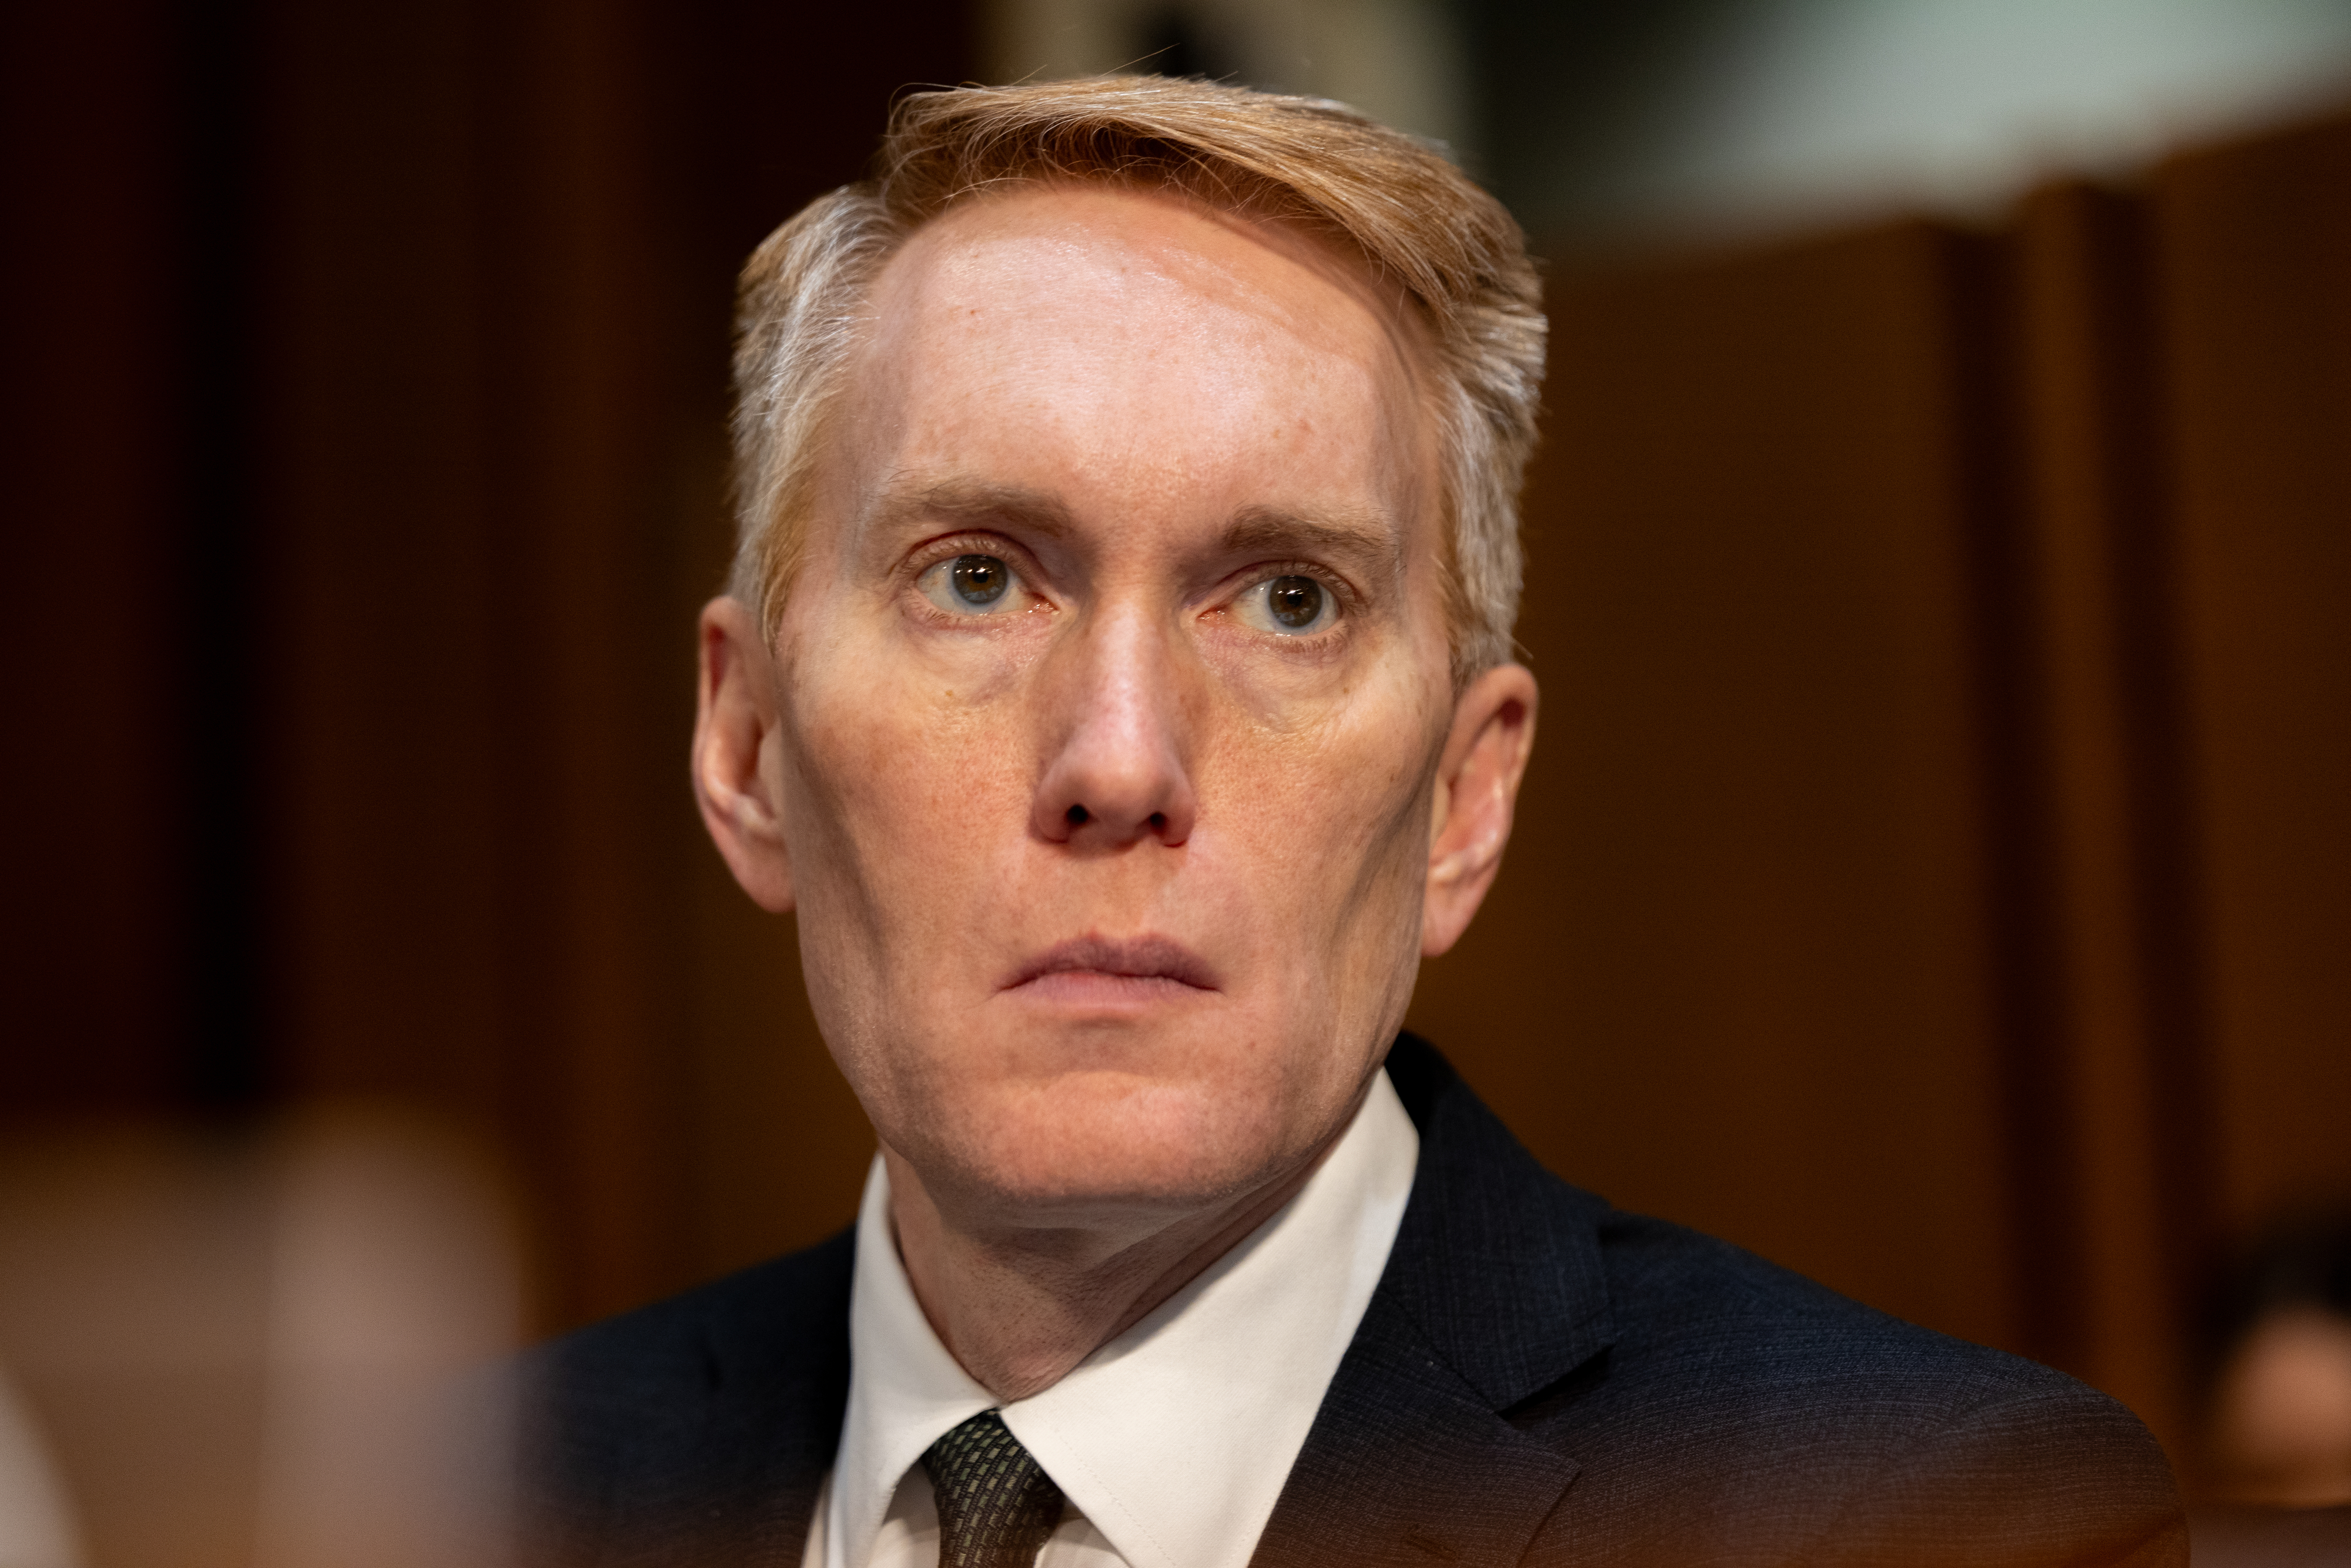 Close-up of Lankford in a suit and tie, looking solemn